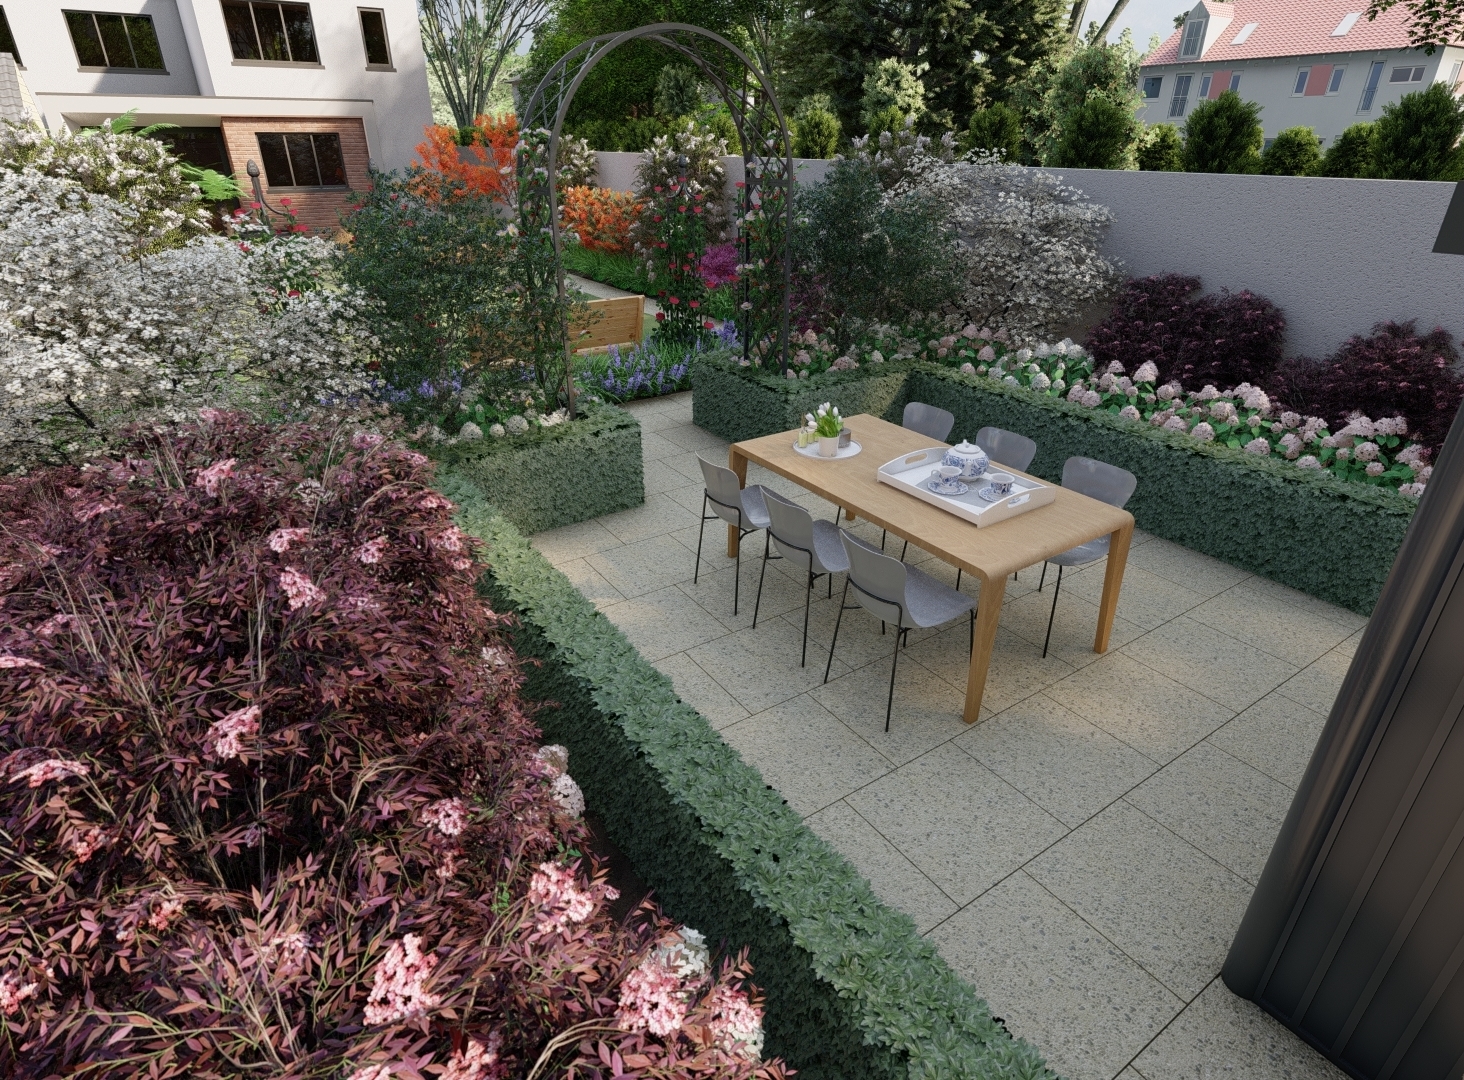 3D Design Visual illustrating a new garden layout with lush and colourful border planting areas | Owen Chubb Garden Design, Tel 087-2306128